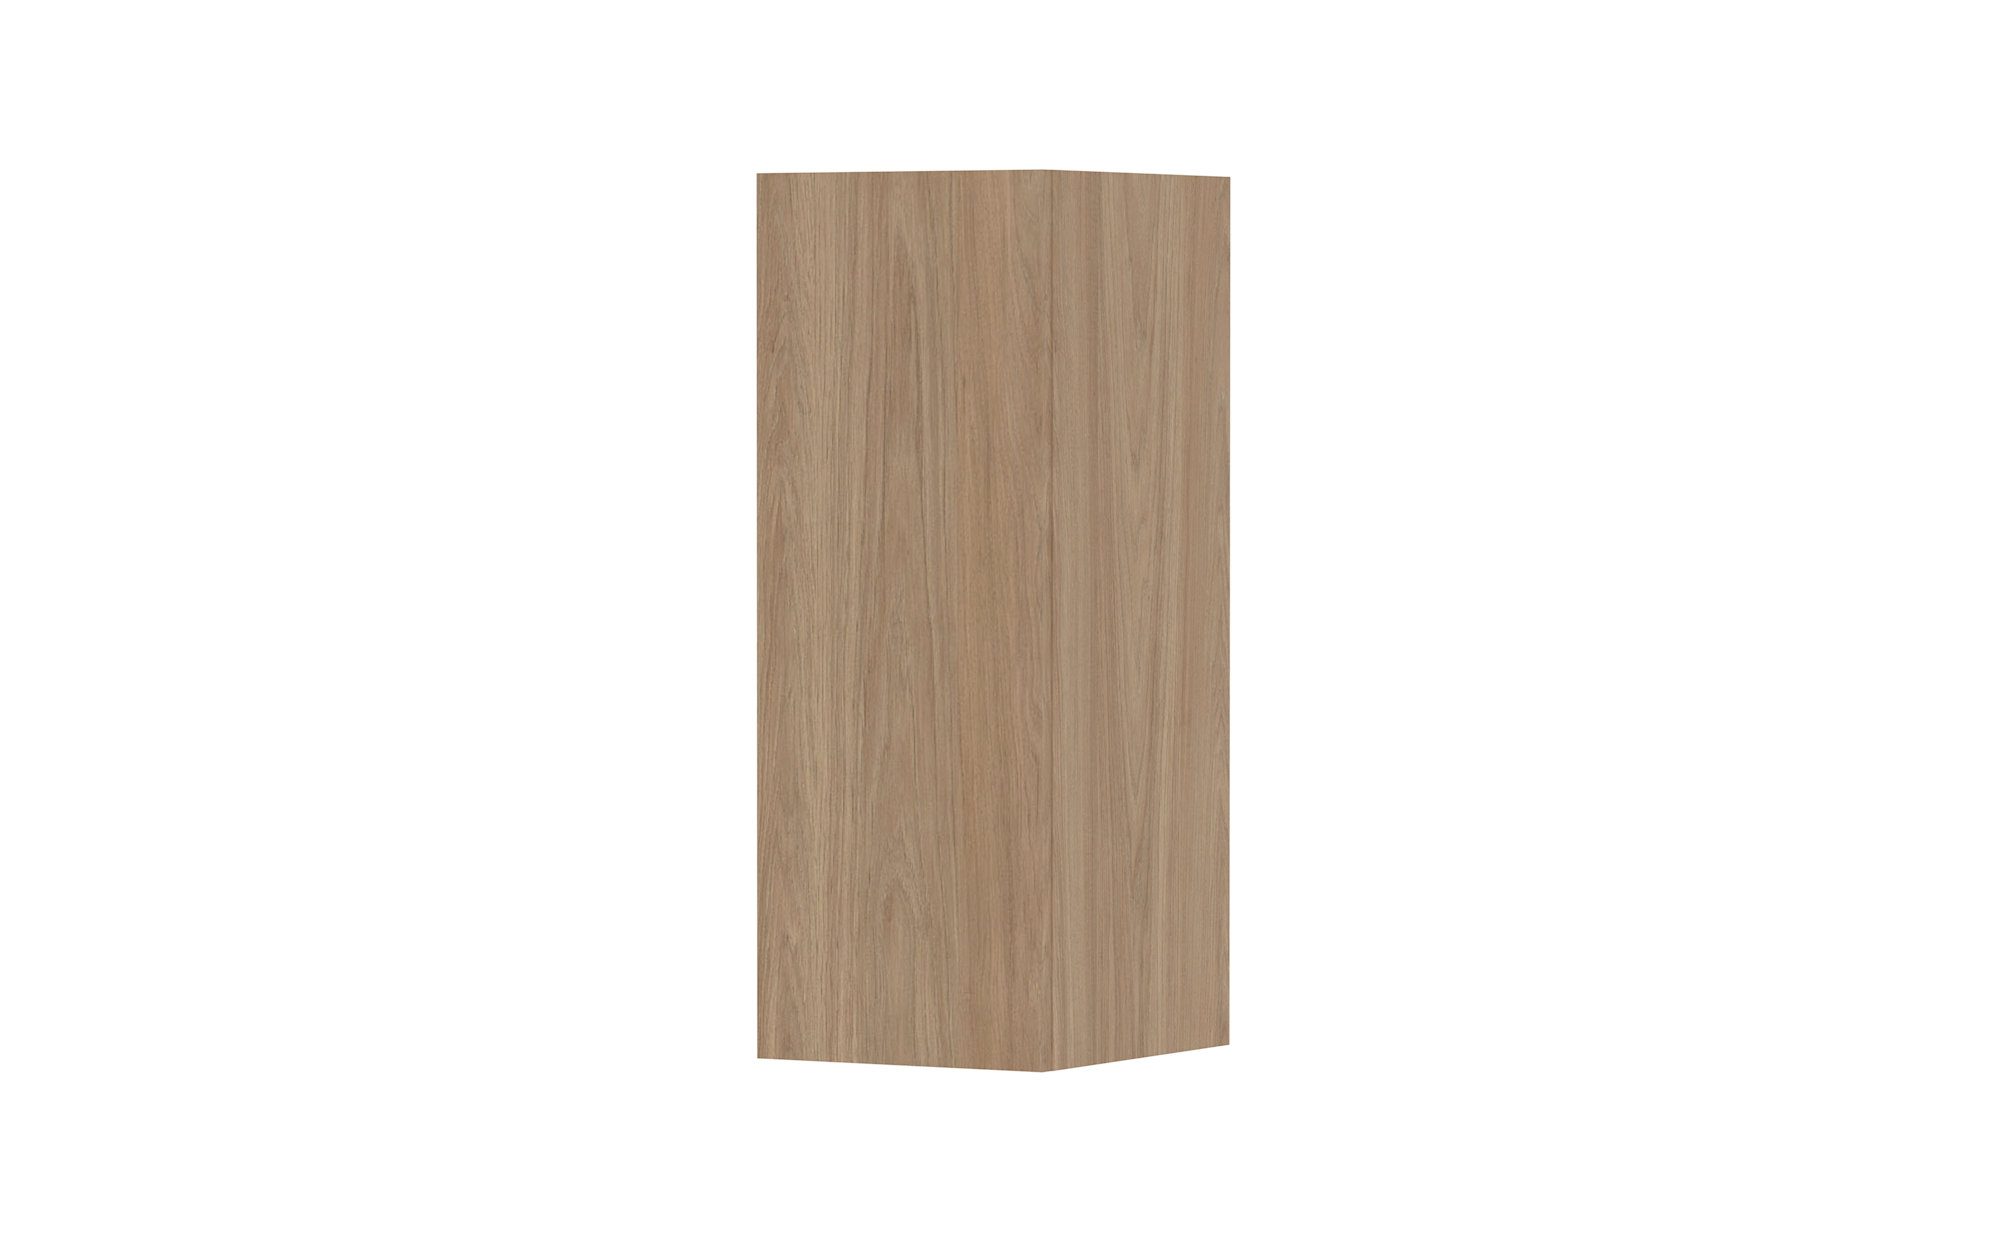 300mm Wall Cabinet